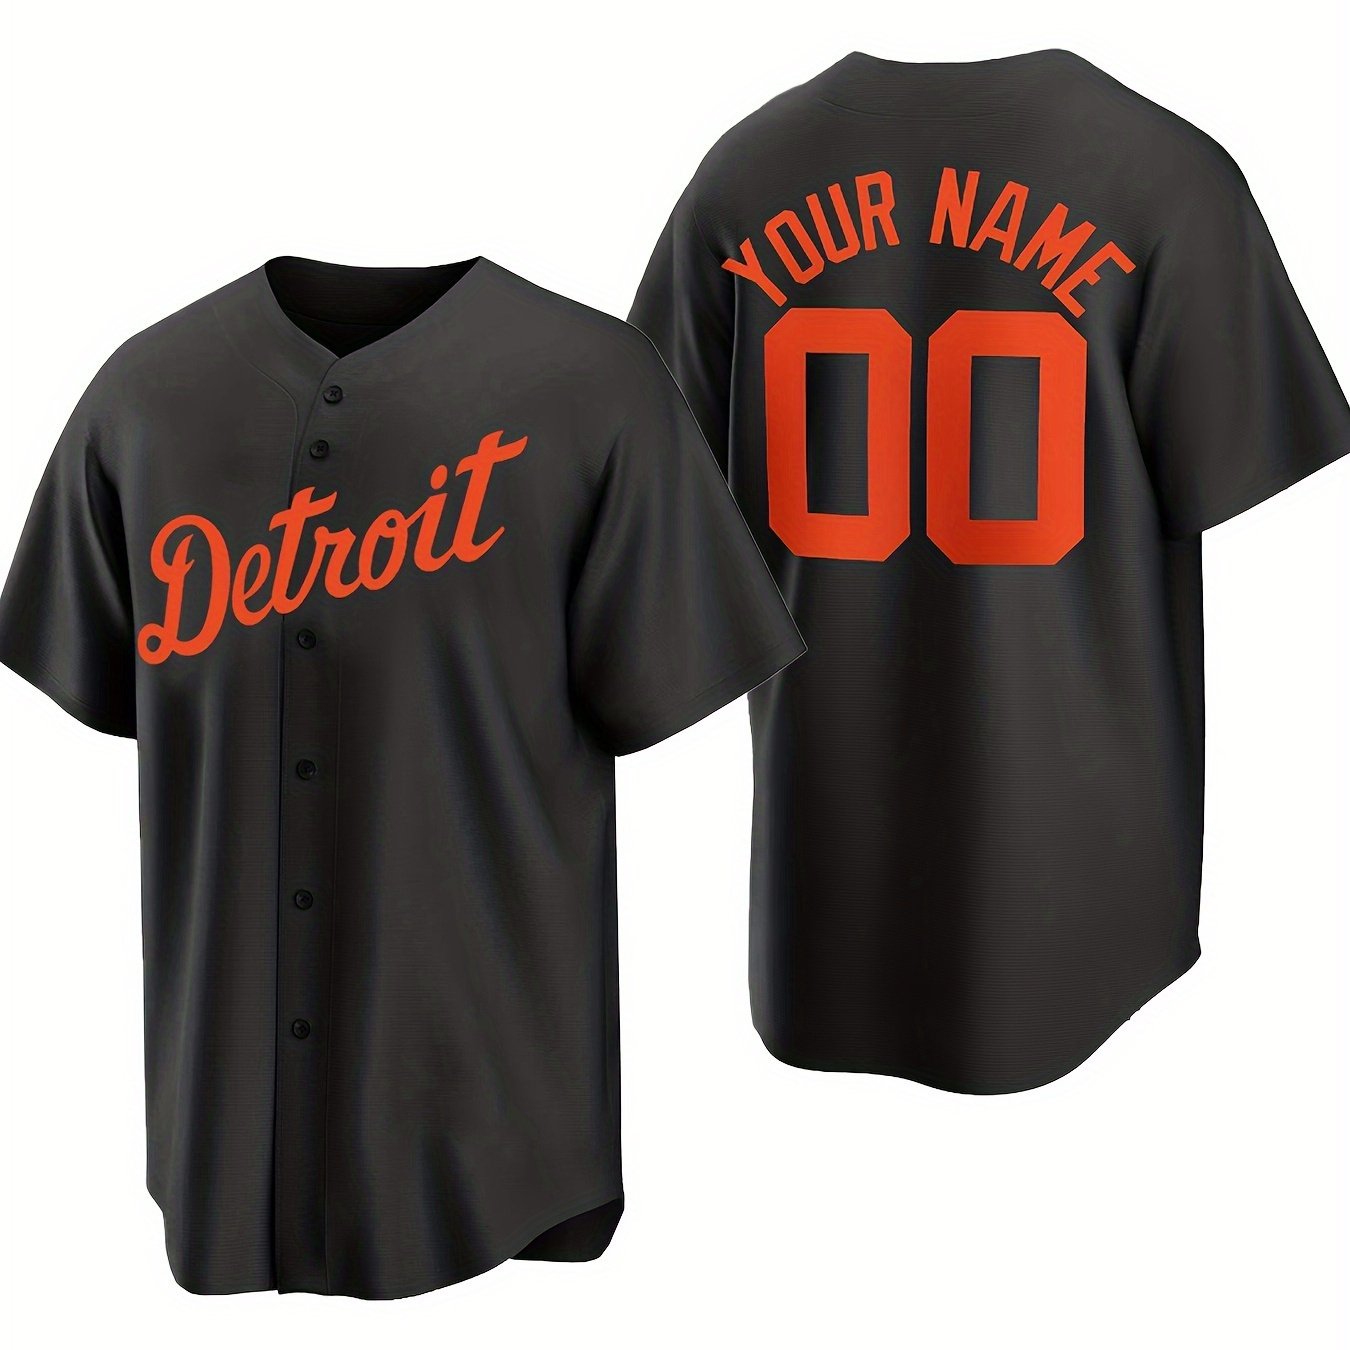 

Personalized Custom Baseball Jersey Shirt For Men, Your Diy Name Numbers & Detroit Graphic Print Short Sleeve Button Up Shirt For Competition Party Training